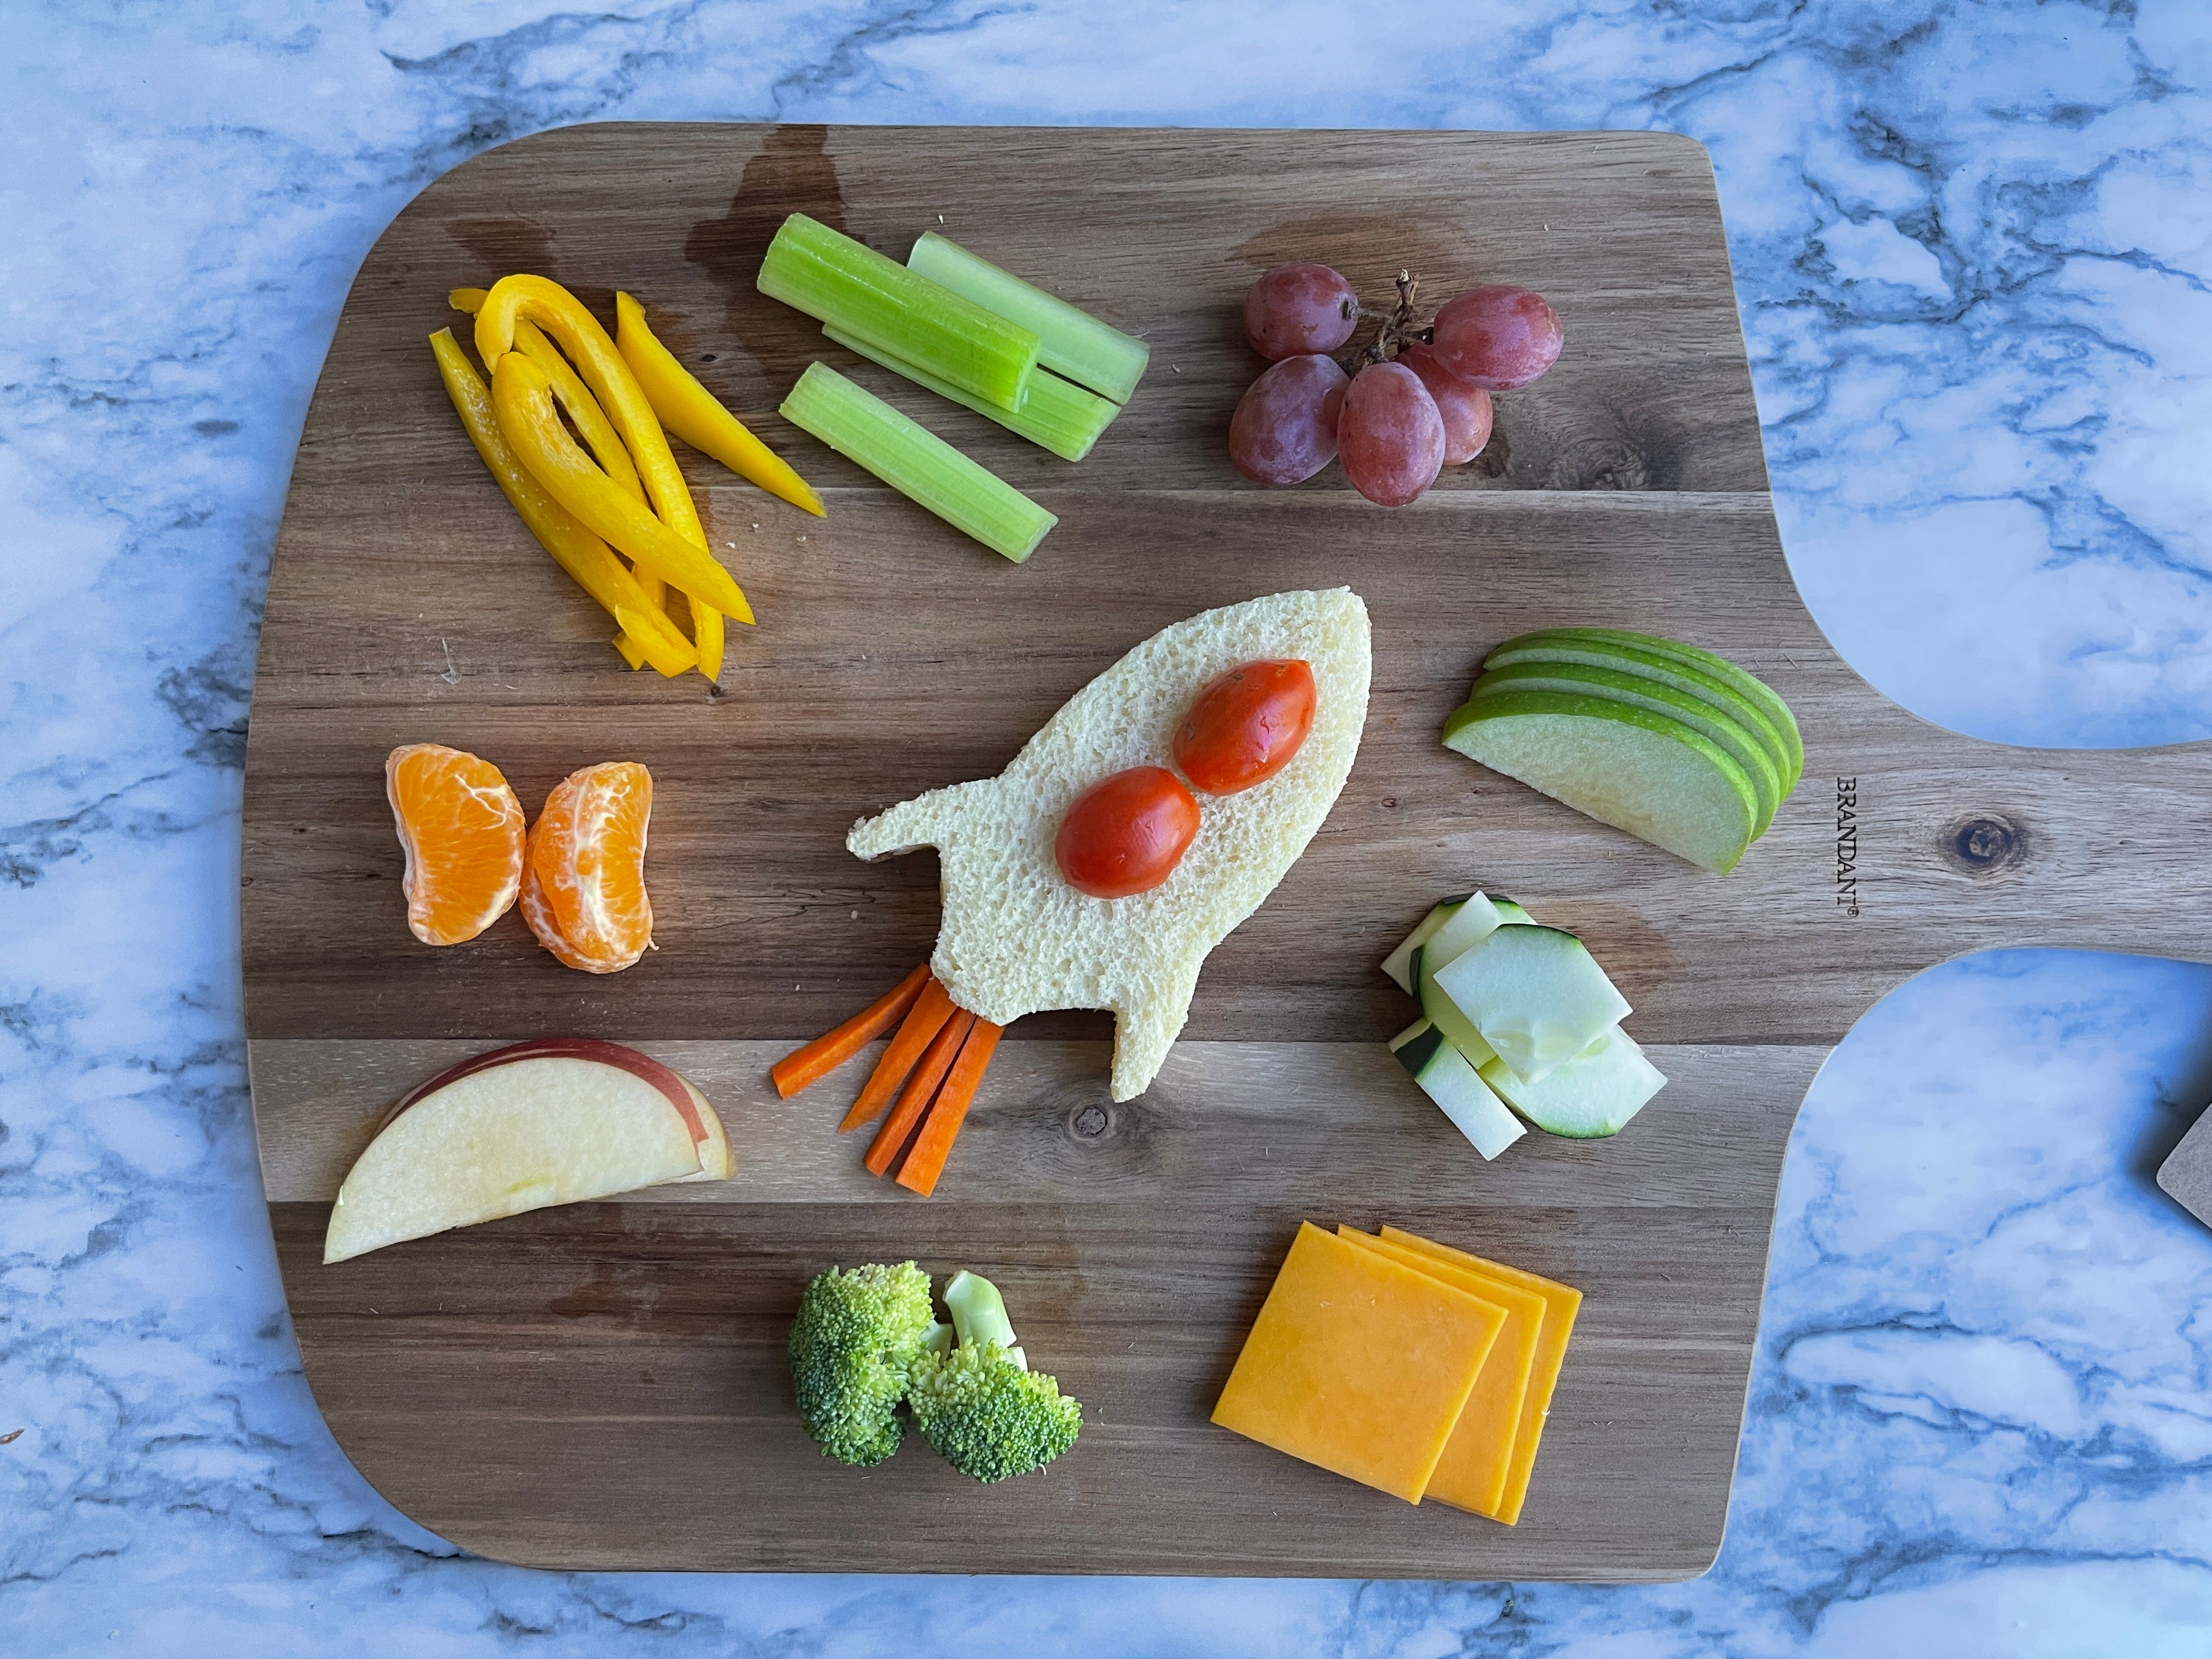 Lifestyle image of a rocket ship shaped sandwich on a cutting board surrounded by fruits and vegetables 